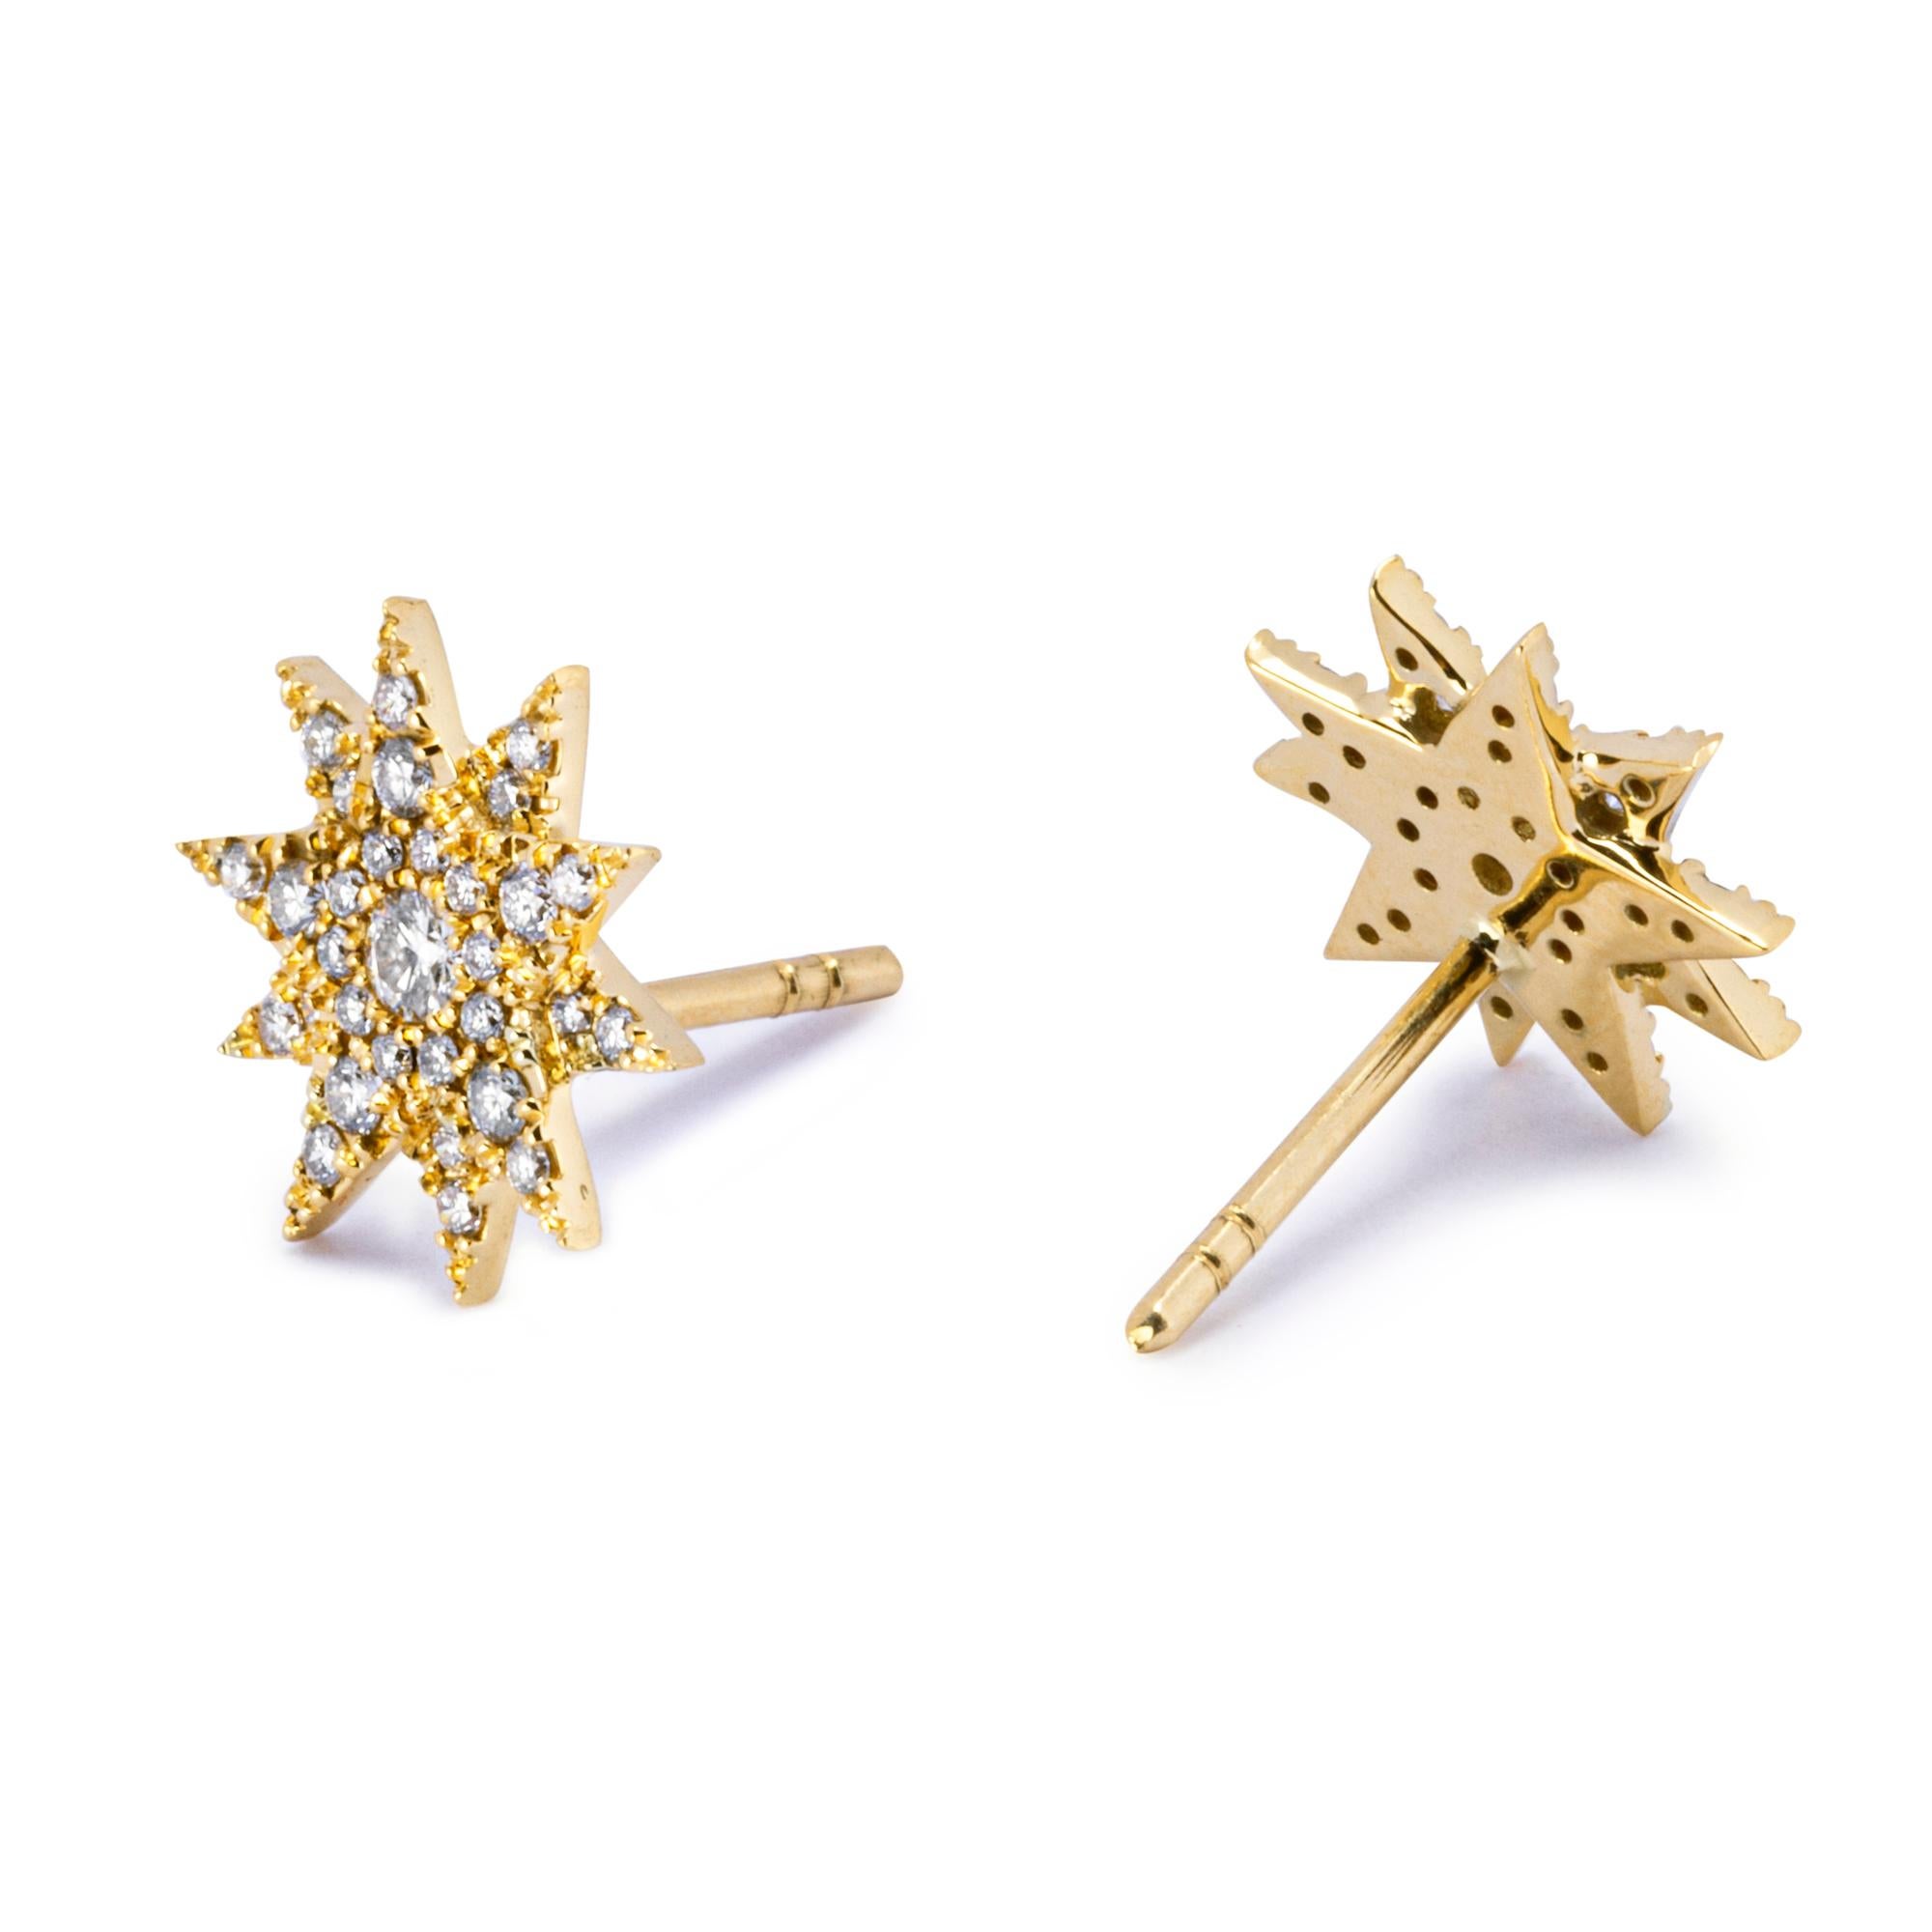 Alex Jona design collection, hand crafted in Italy, 18 karat yellow gold star ear studs, featuring 62 white diamonds weighting 0.44 carats, F Color, VVS1 Clarity.
Dimensions: W 0.46 in/11.79mm, D 0.07in/1.89mm.

Alex Jona jewels stand out, not only